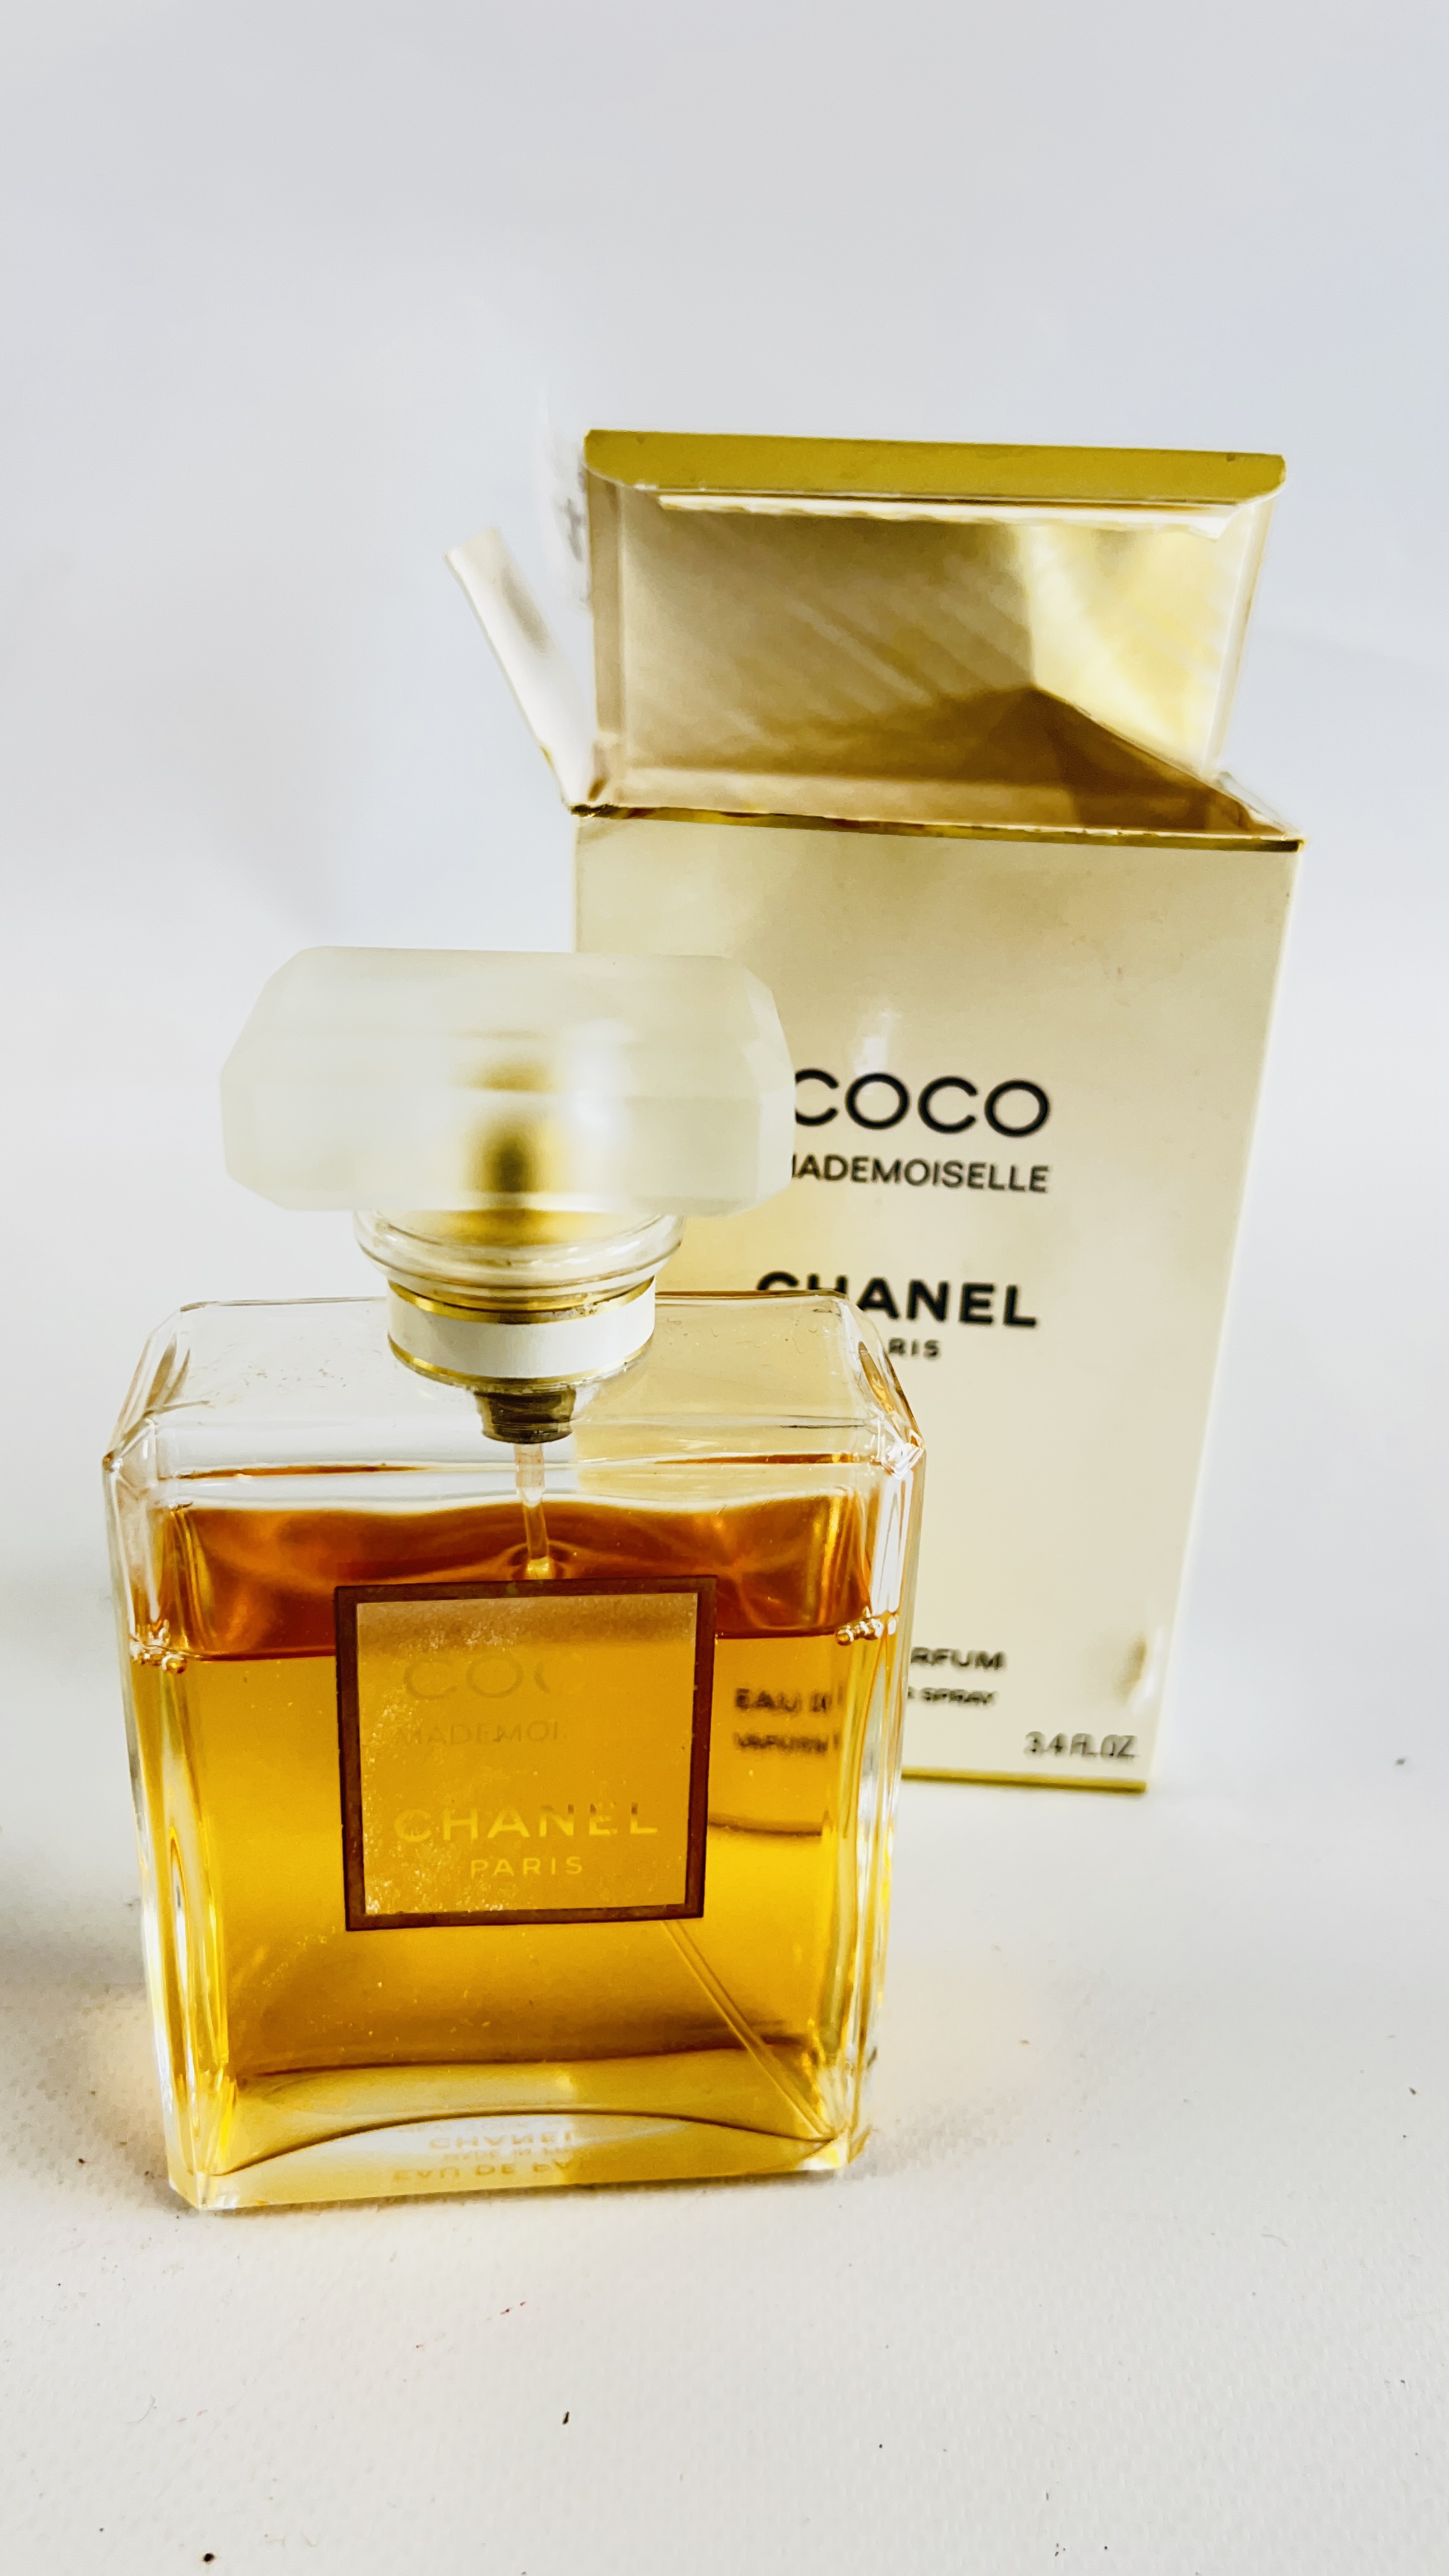 A 100ML PART USED BOTTLE MARKED "CHANEL" COCO MADEMOISELLE (BOXED AS CLEARED). - Image 2 of 3